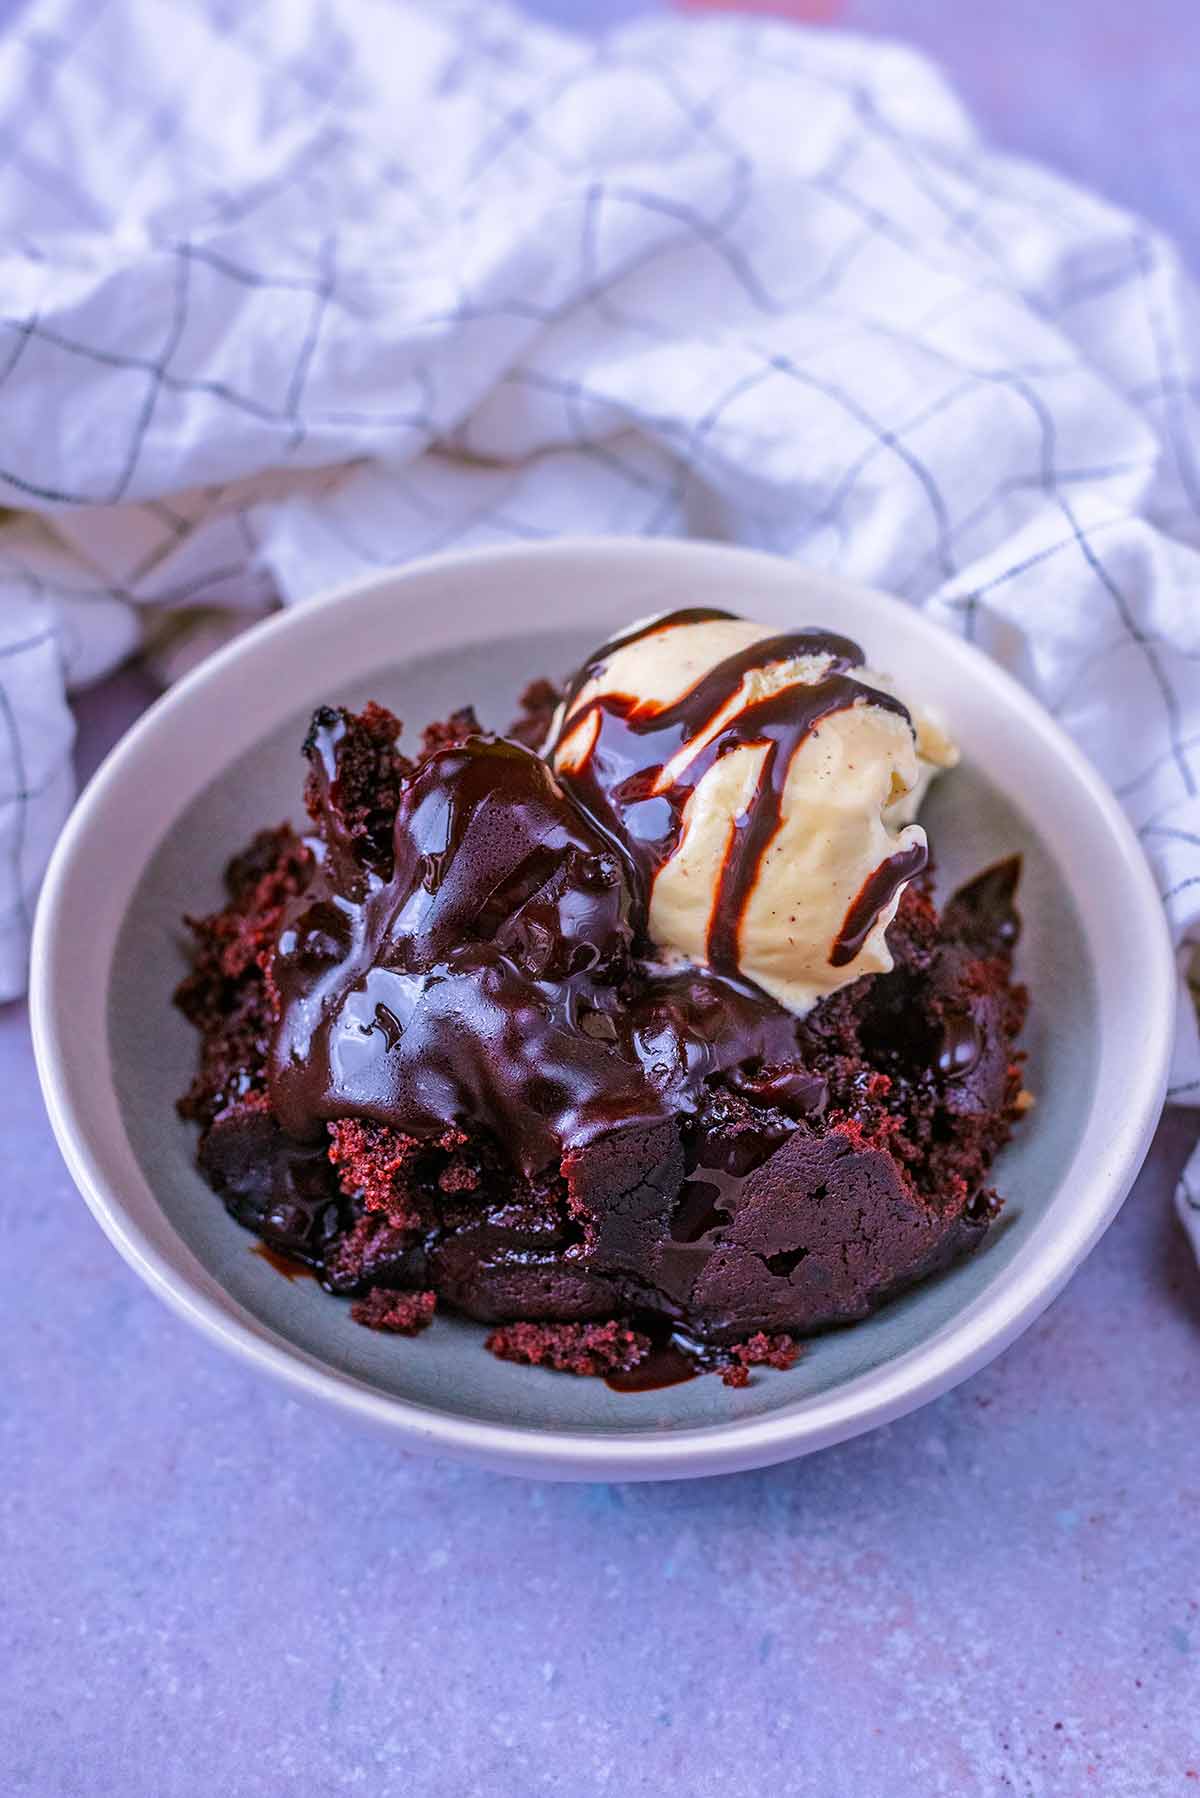 A bowl of chocolate cake and ice cream, covered in chocolate sauce.